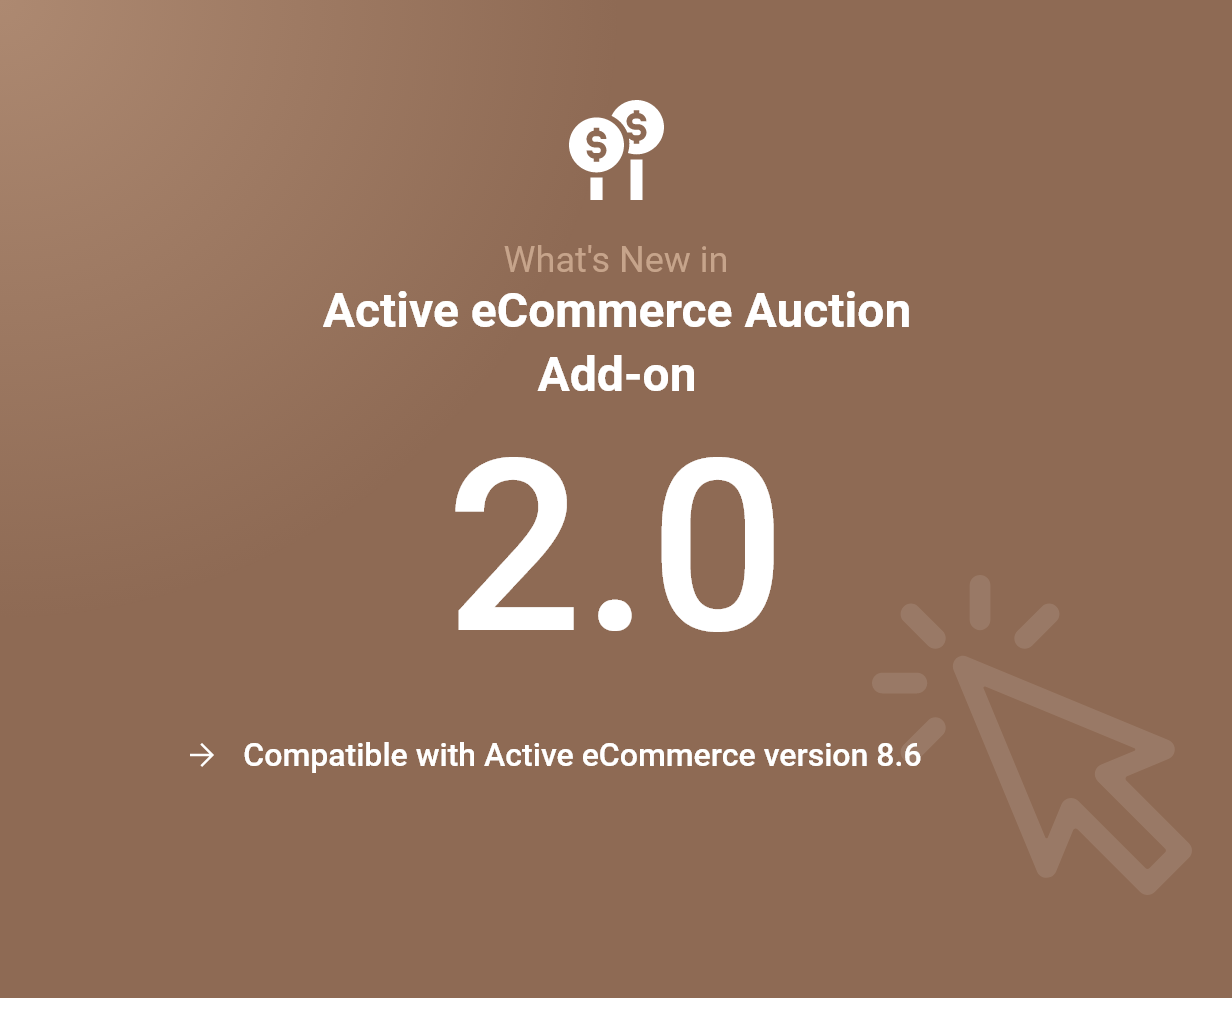 Active eCommerce Auction Add-on - 2